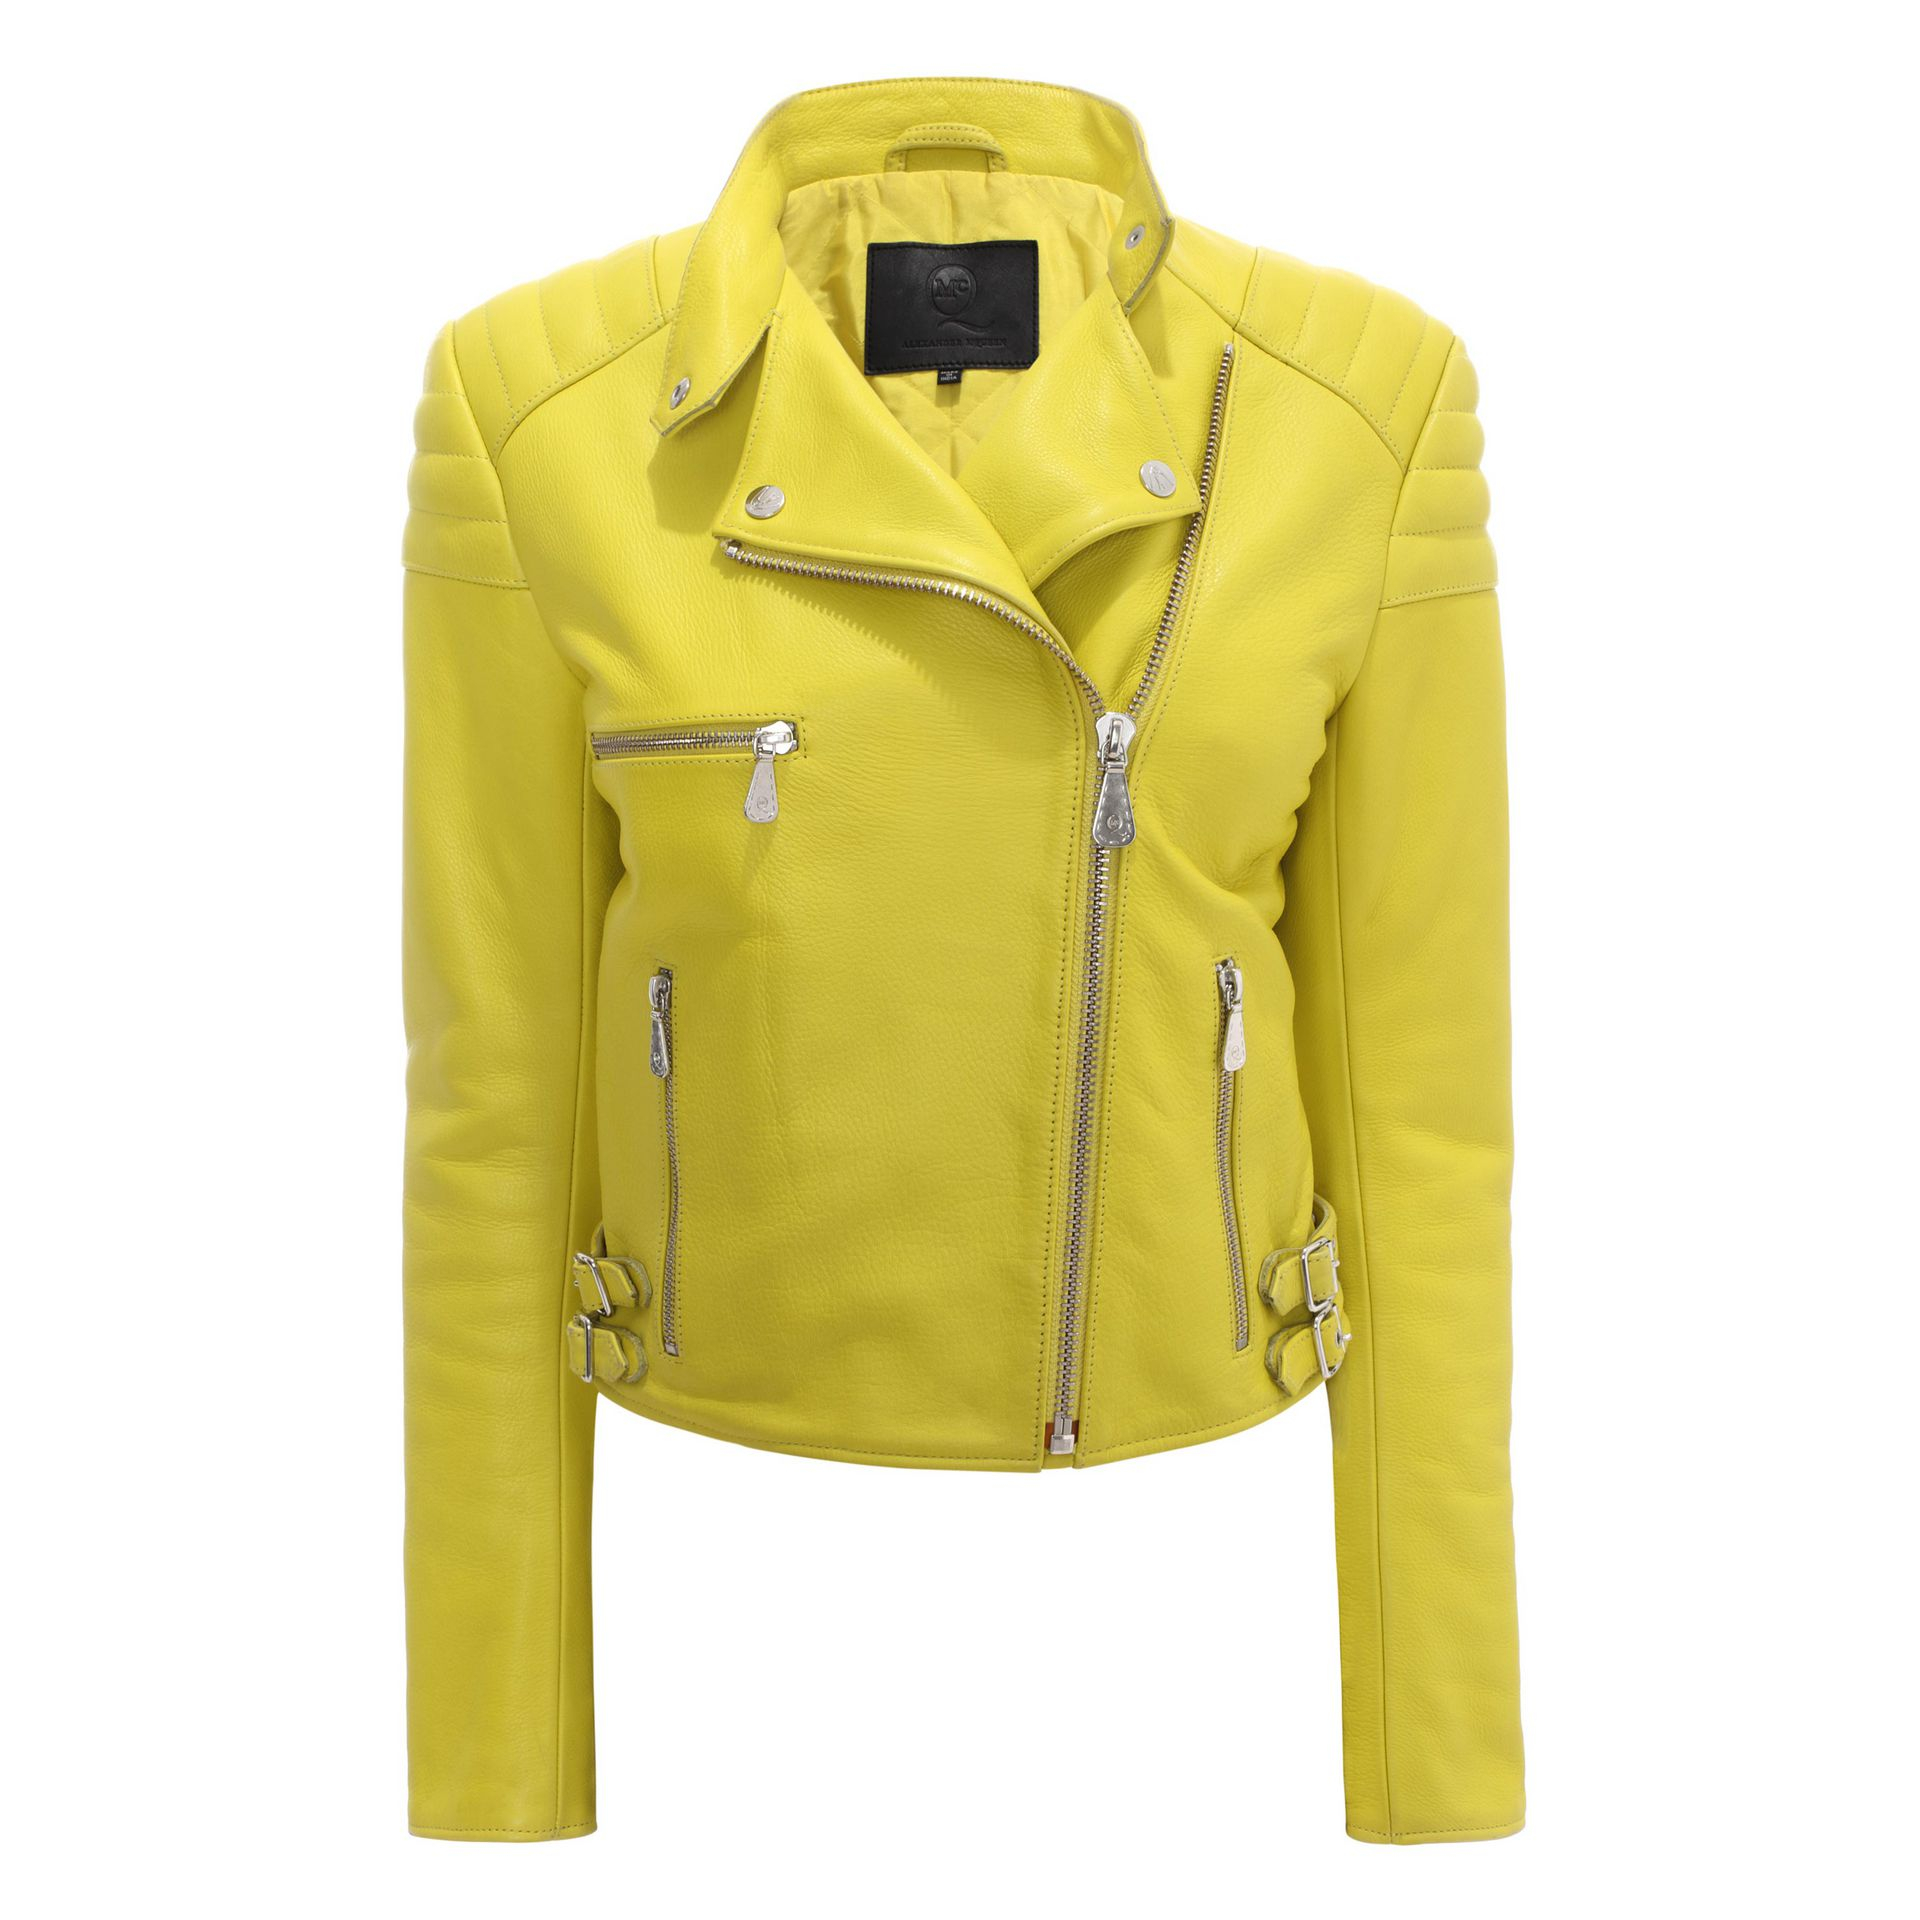 Lyst - Mcq Creased Leather Biker Jacket in Yellow